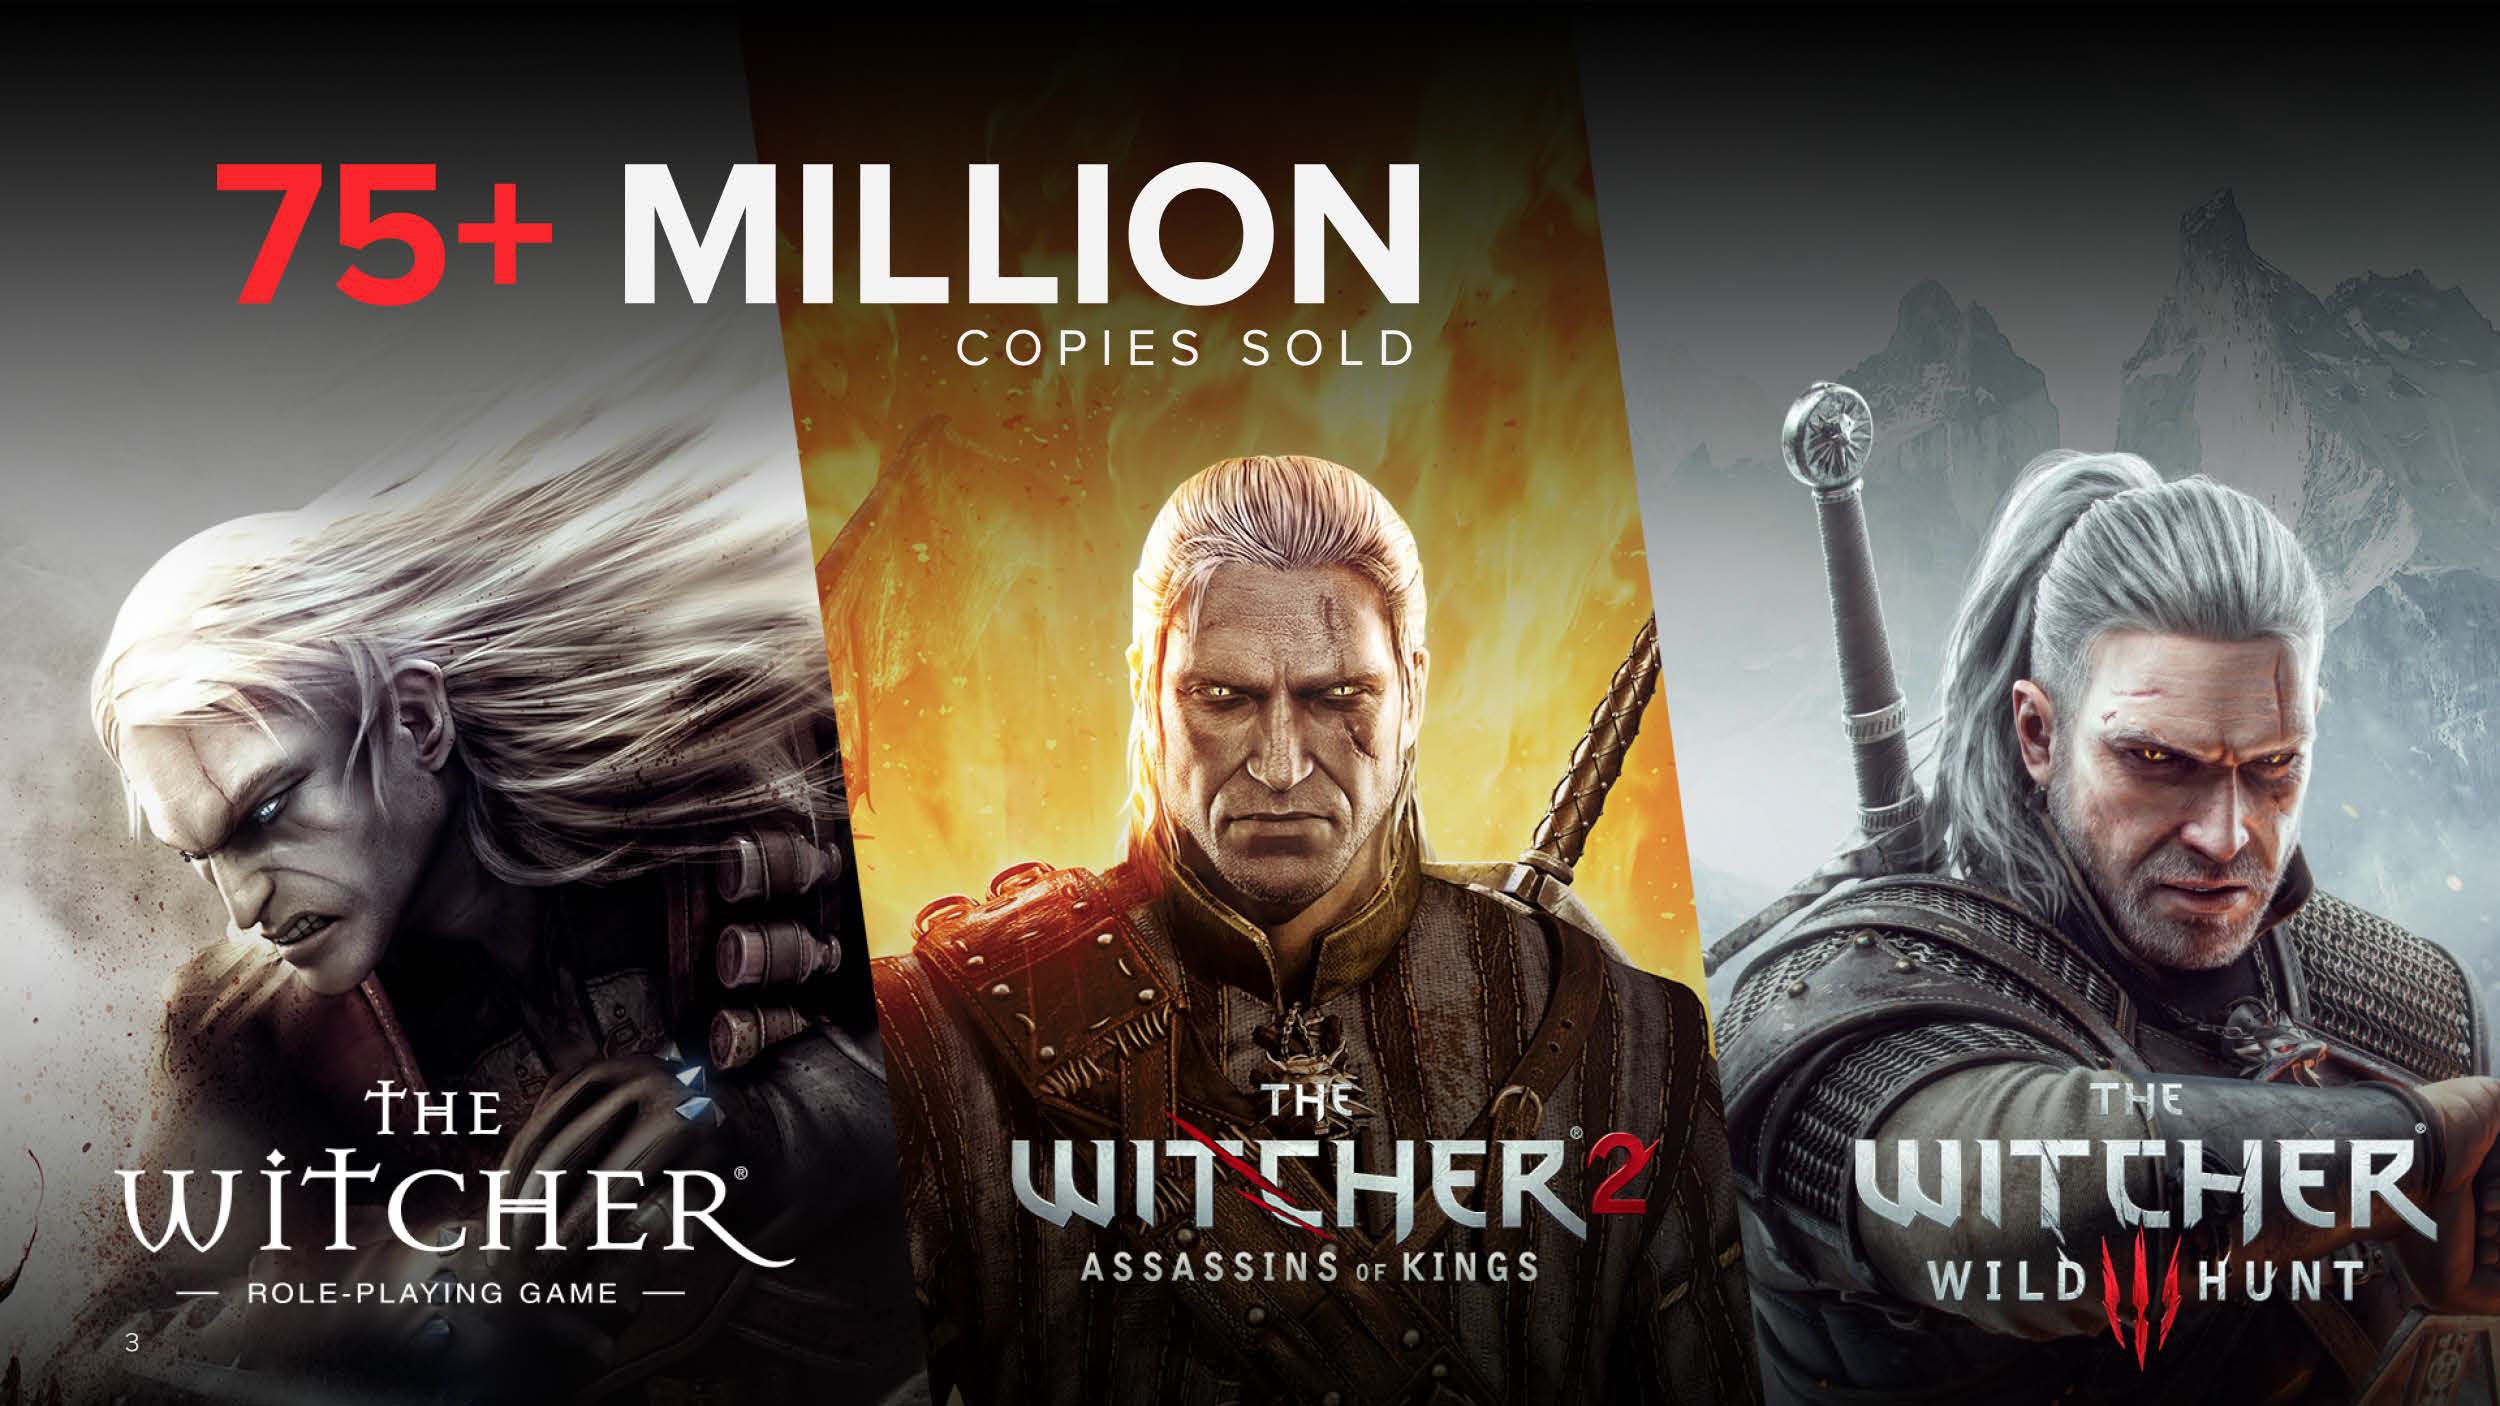 The Witcher 3: Wild Hunt sales top 50 million; The Witcher series